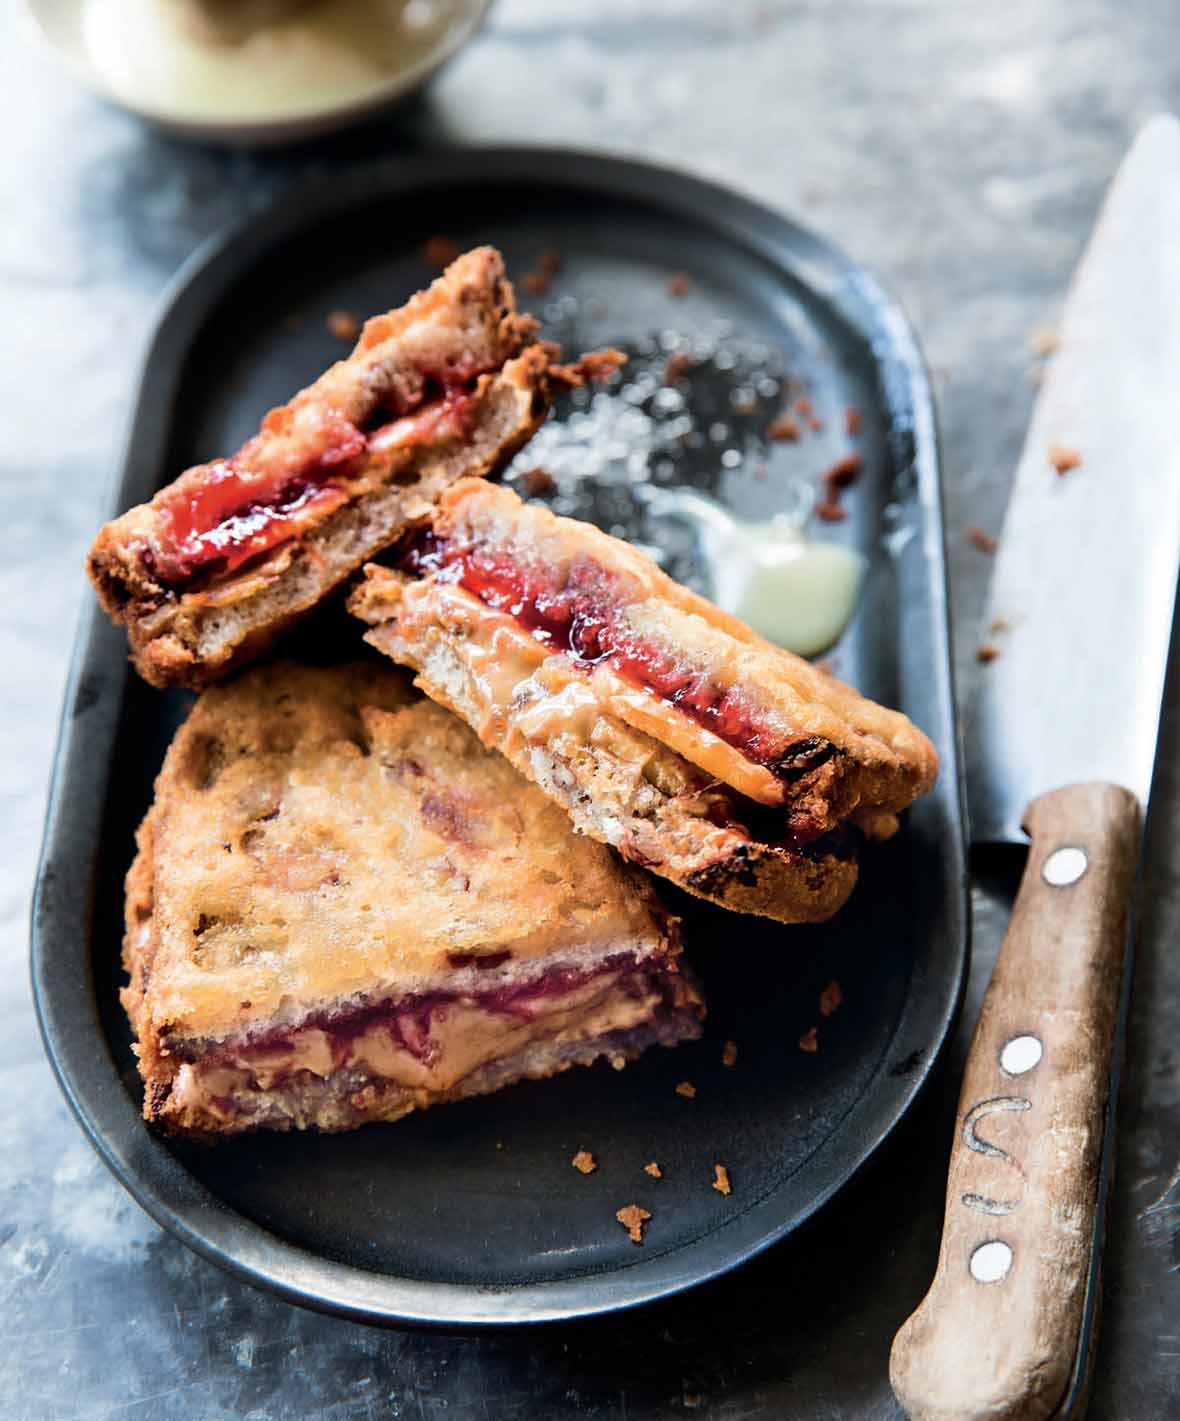 Deep-fried peanut butter and jelly sandwiches